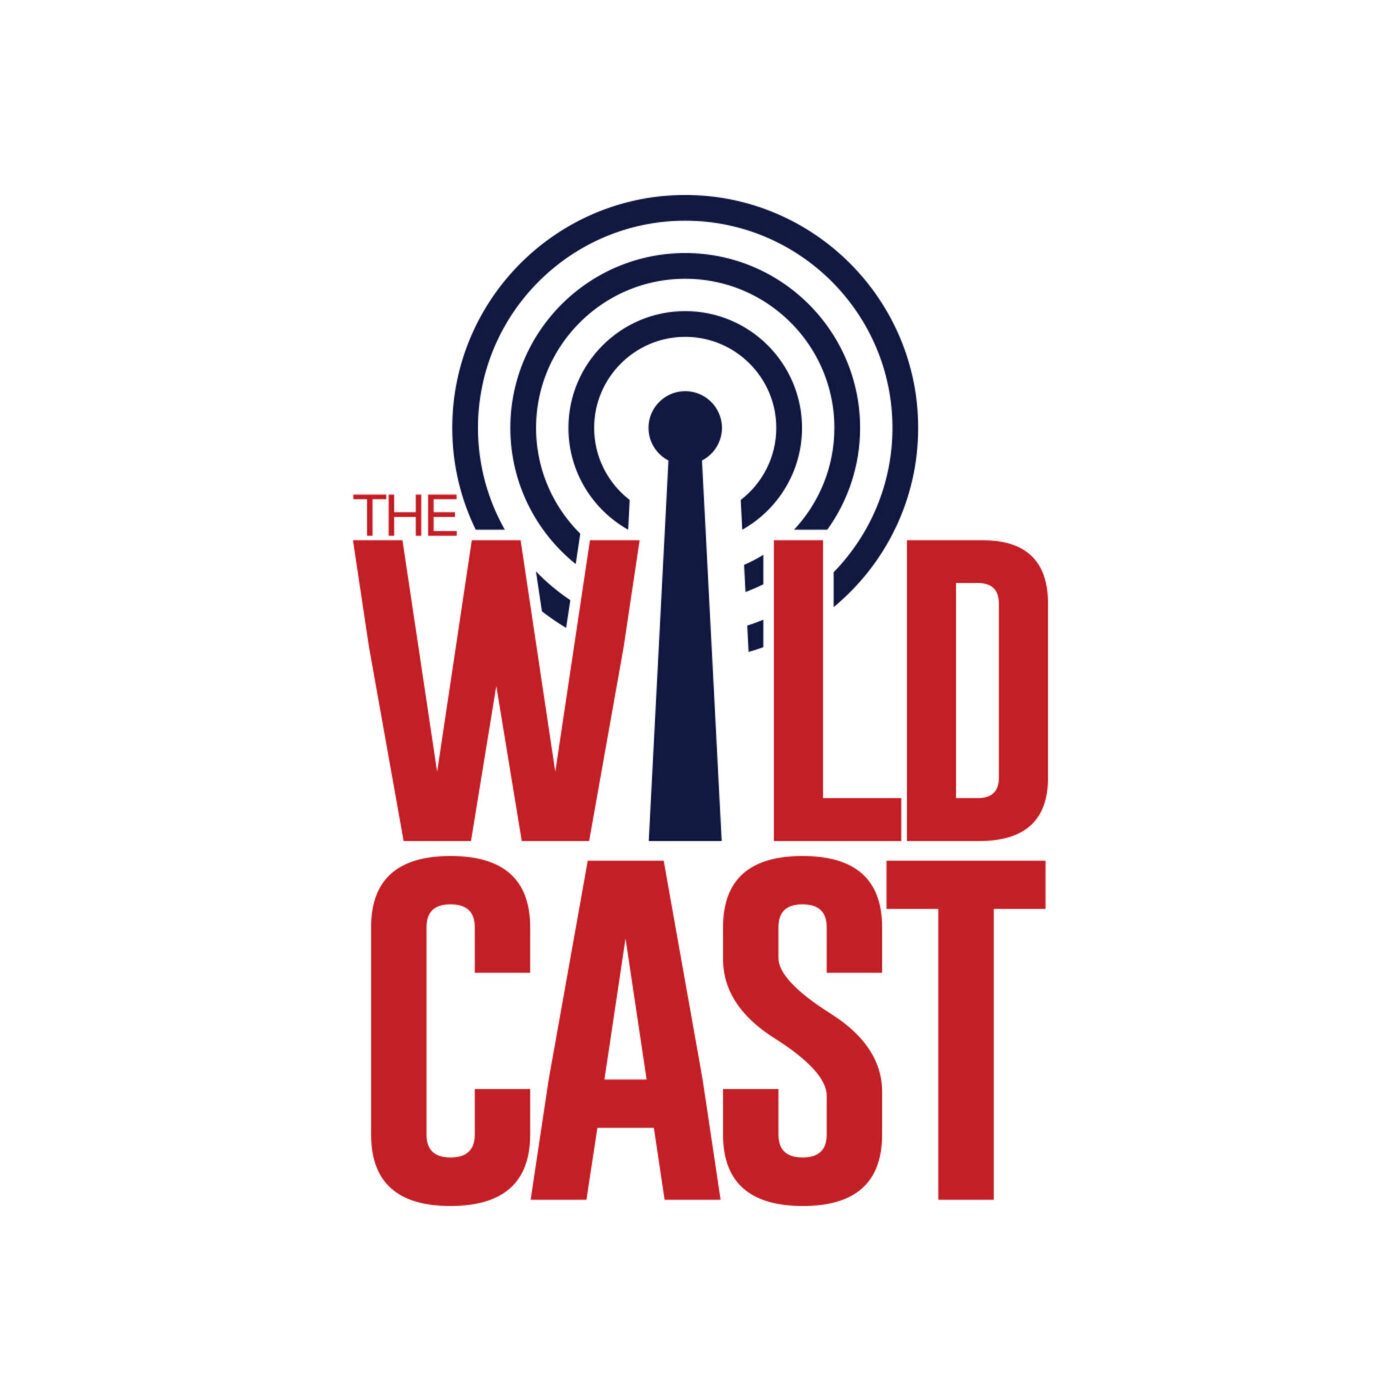 The Wildcast, Episode 405: Can Jayden de Laura, Arizona preserve bowl eligibility with a win over Washington State?